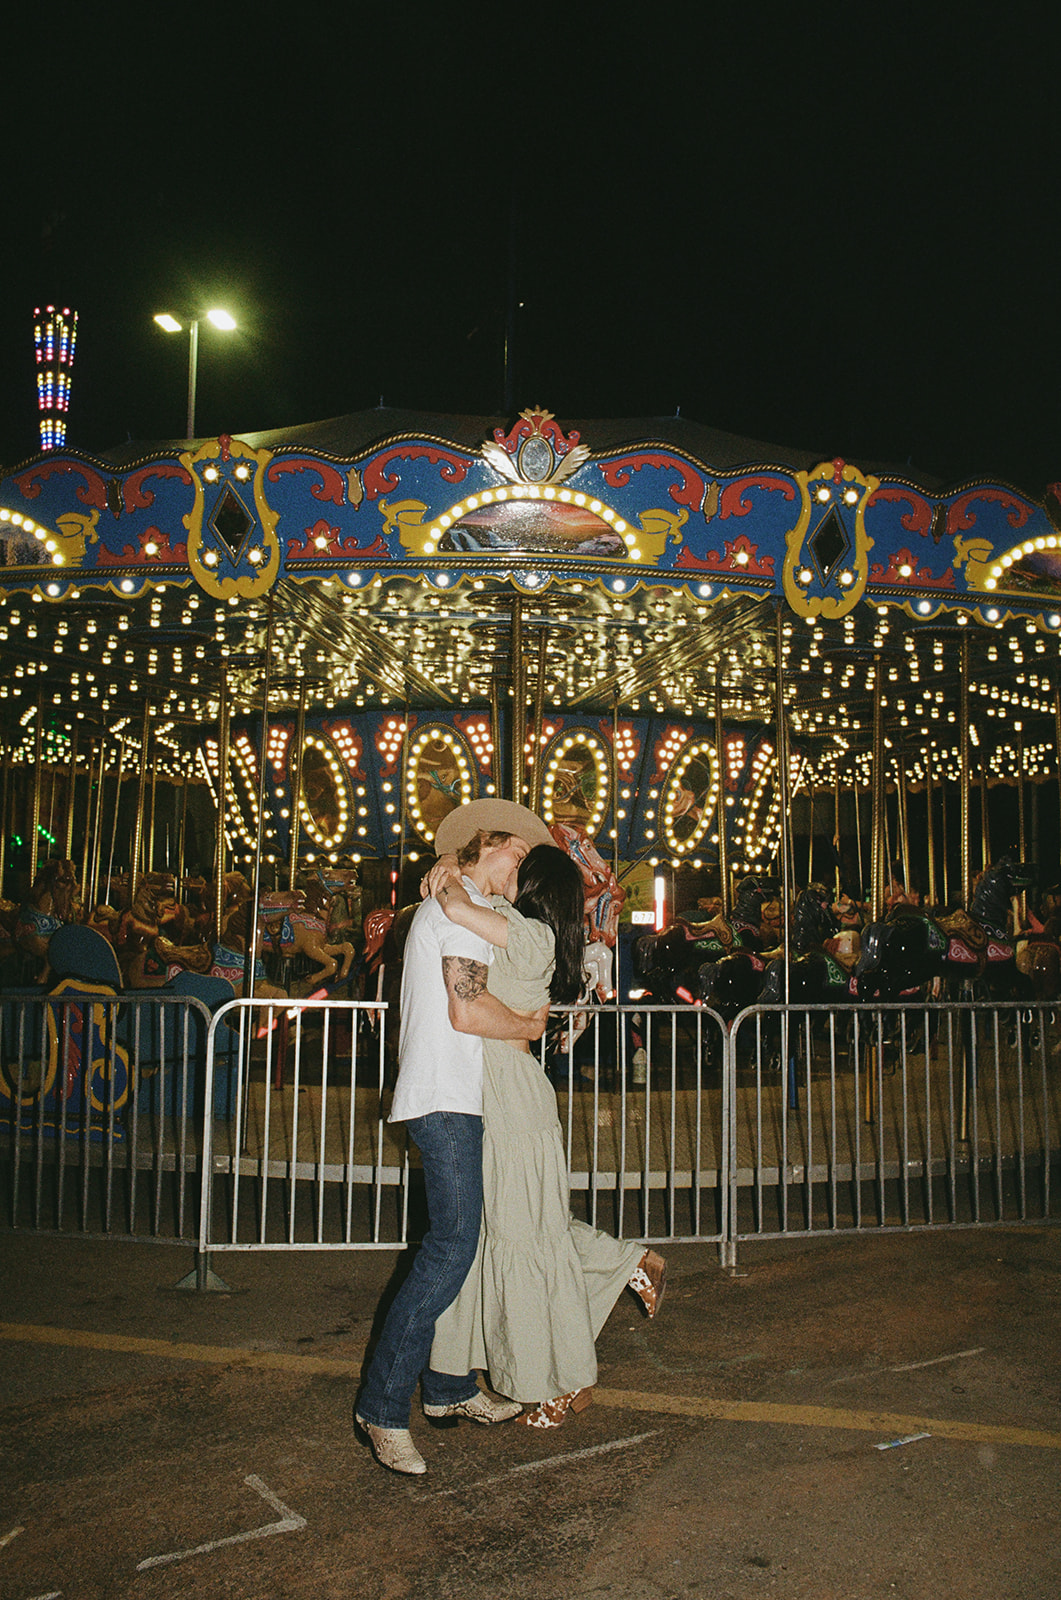 35mm film of engaged couple at the calgary alberta stampede